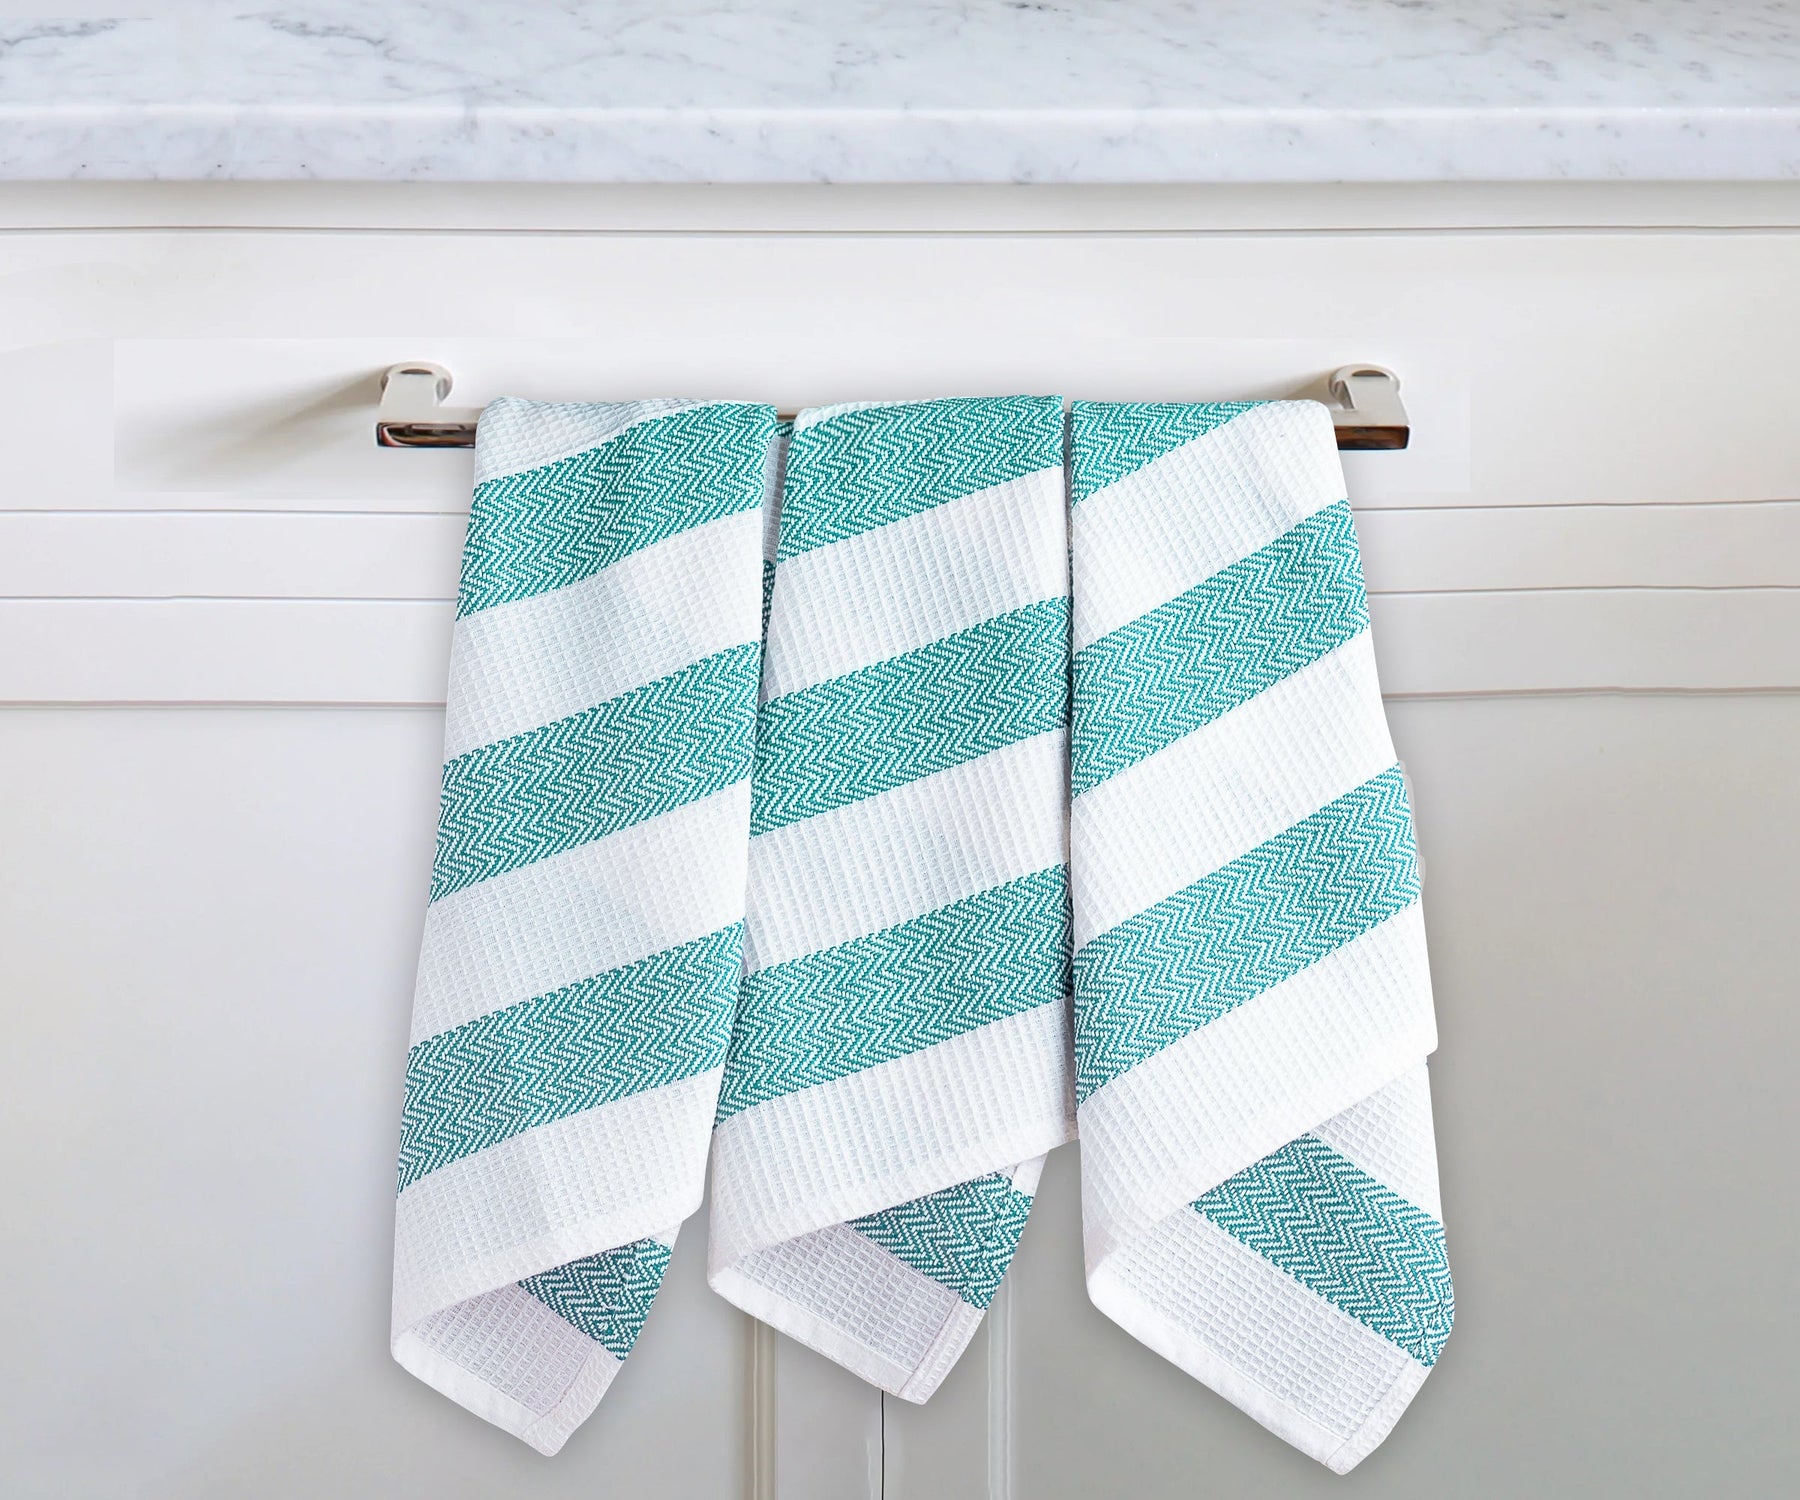 Striped towels, adding a touch of luxury to your bathroom decor.